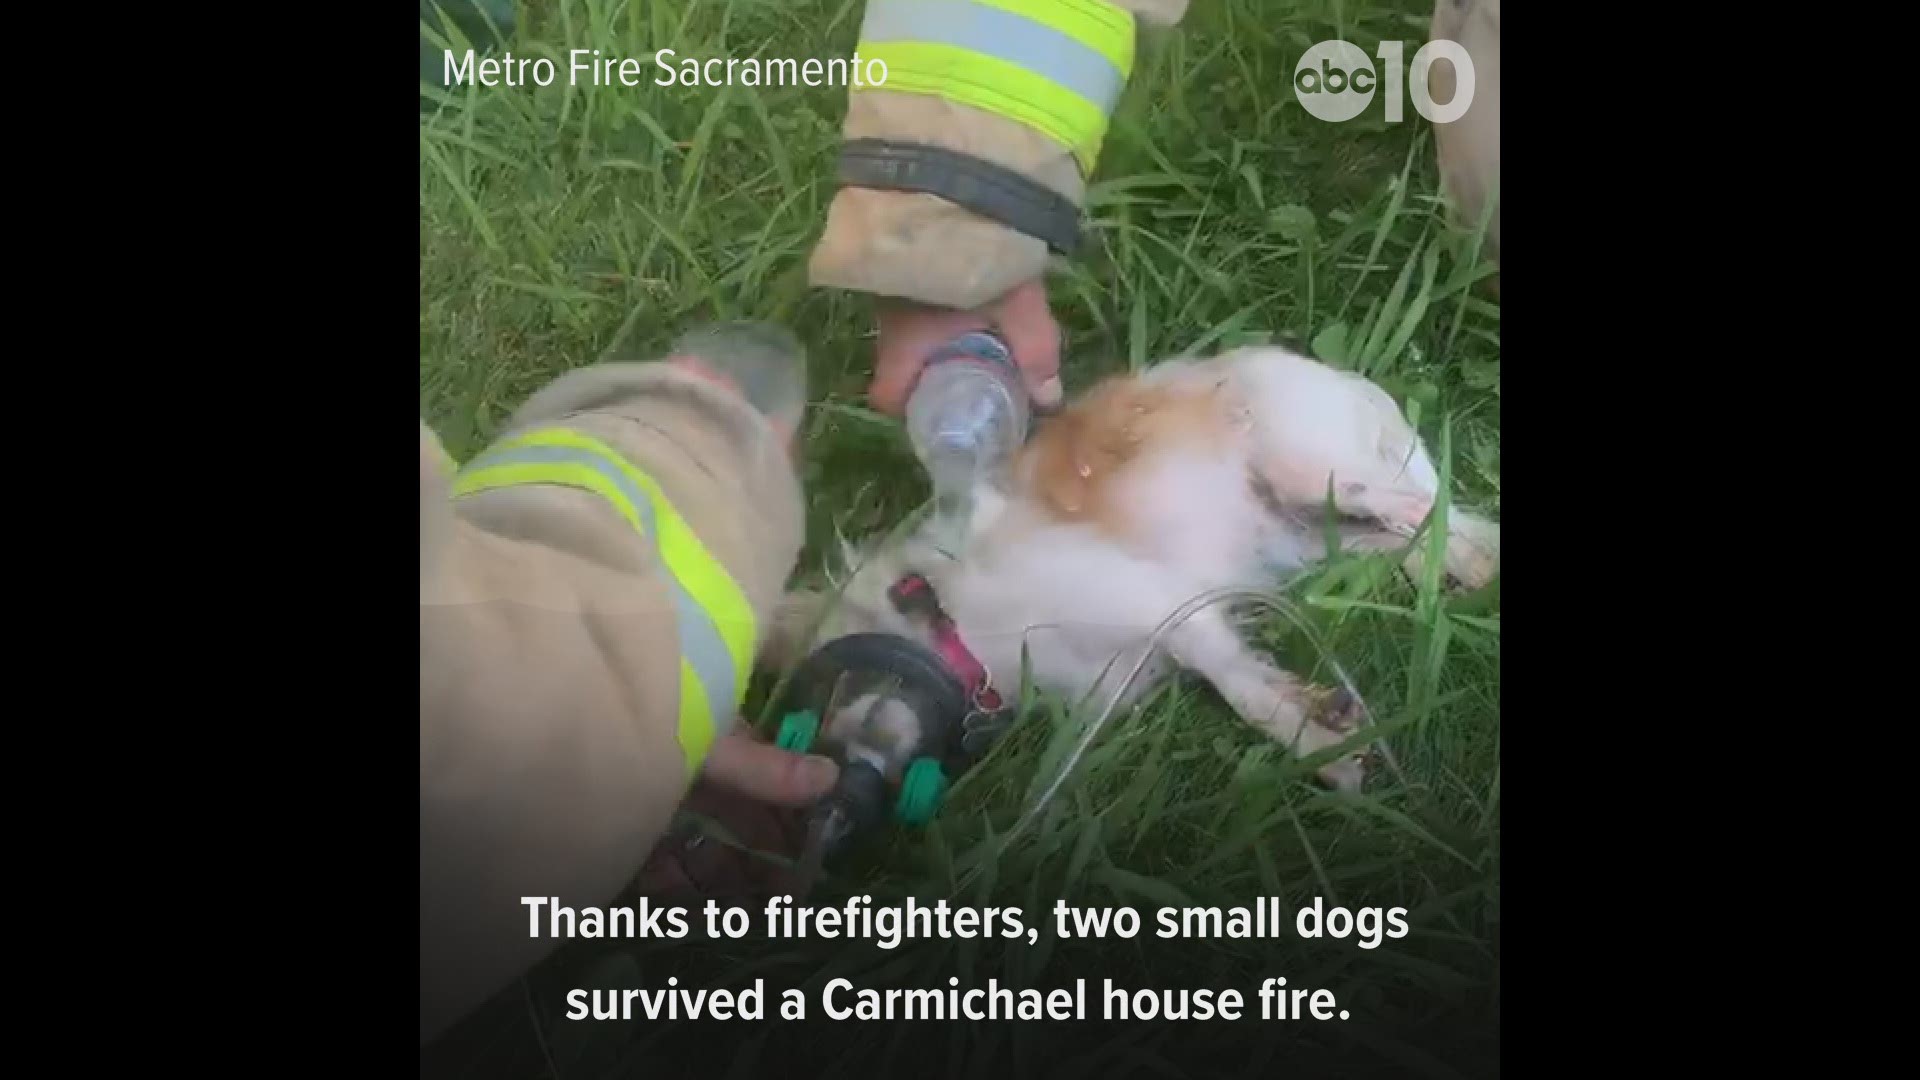 Sacramento Metropolitan Fire District firefighters rescued and revived two small dogs after a house fire in Carmichael Wednesday night. Looks like Coco and Kiwi are safe, sound and back in loving arms after the crews hard work!